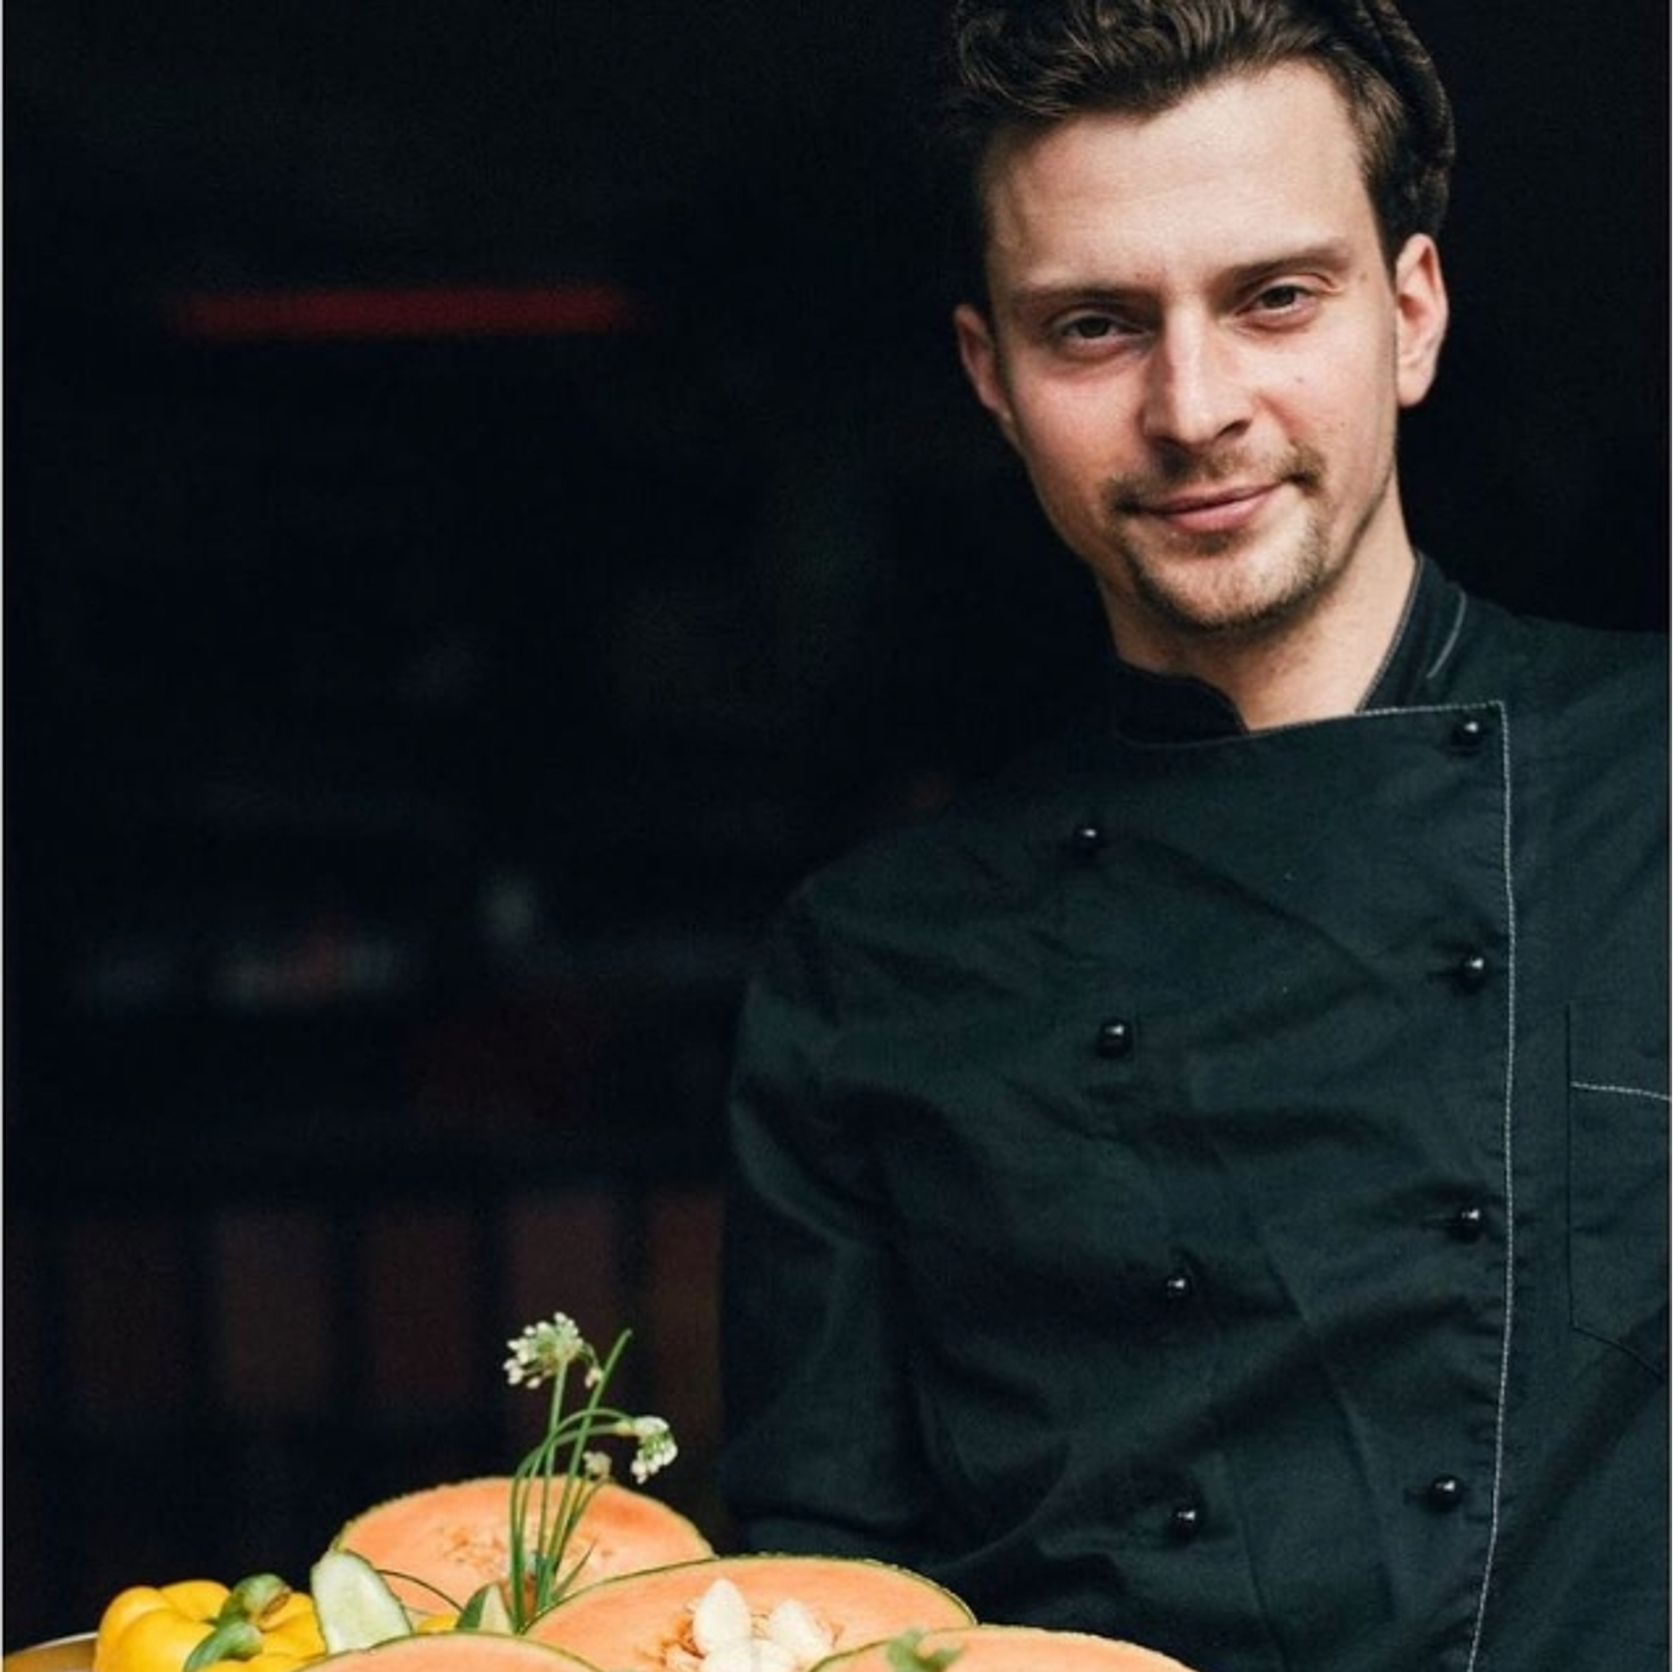 Profile picture of the chef owning the menu